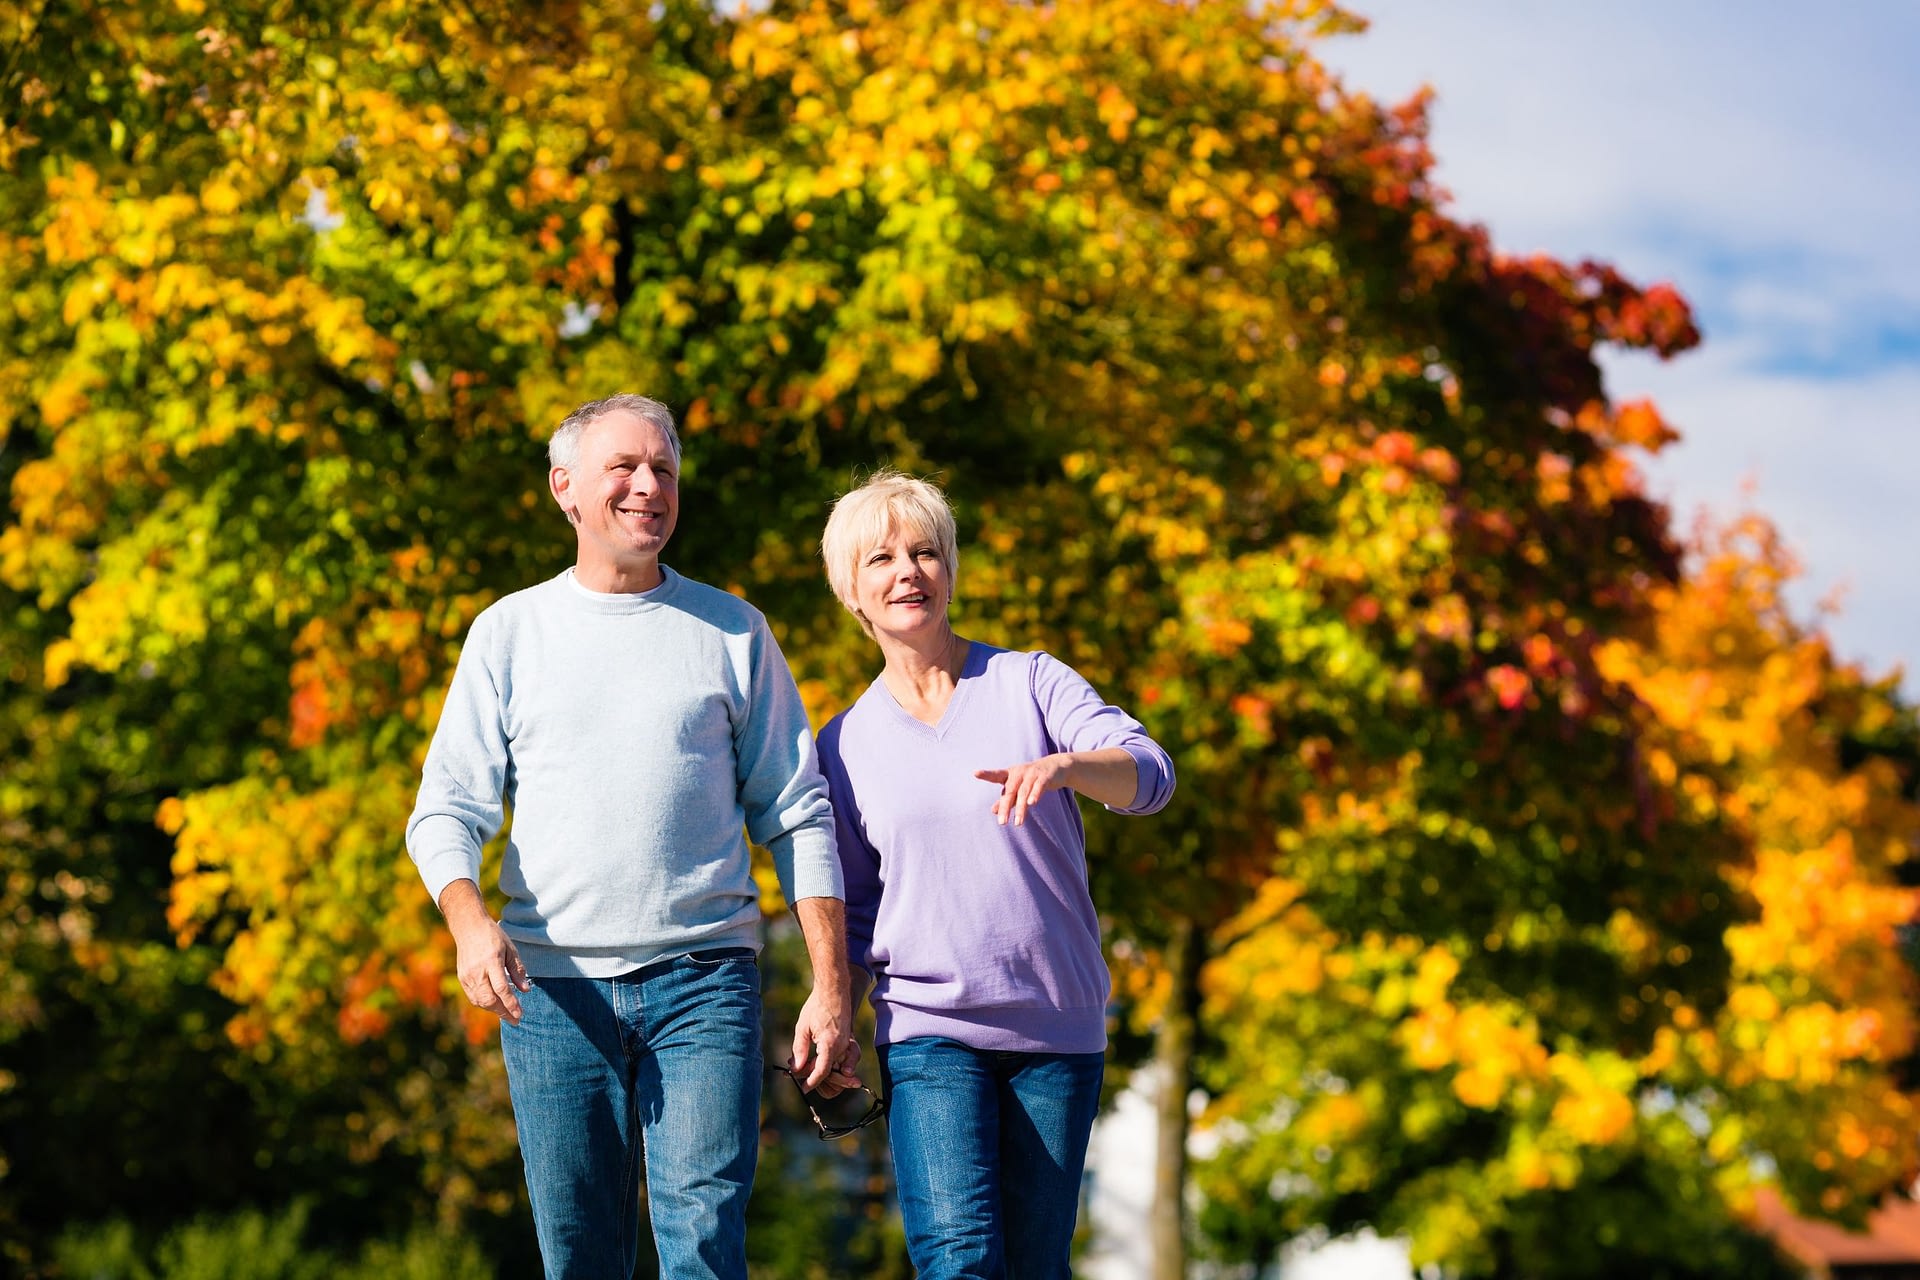 Man And Woman Senior Couple Having A Walk In Autumn Or Fall Outdoors